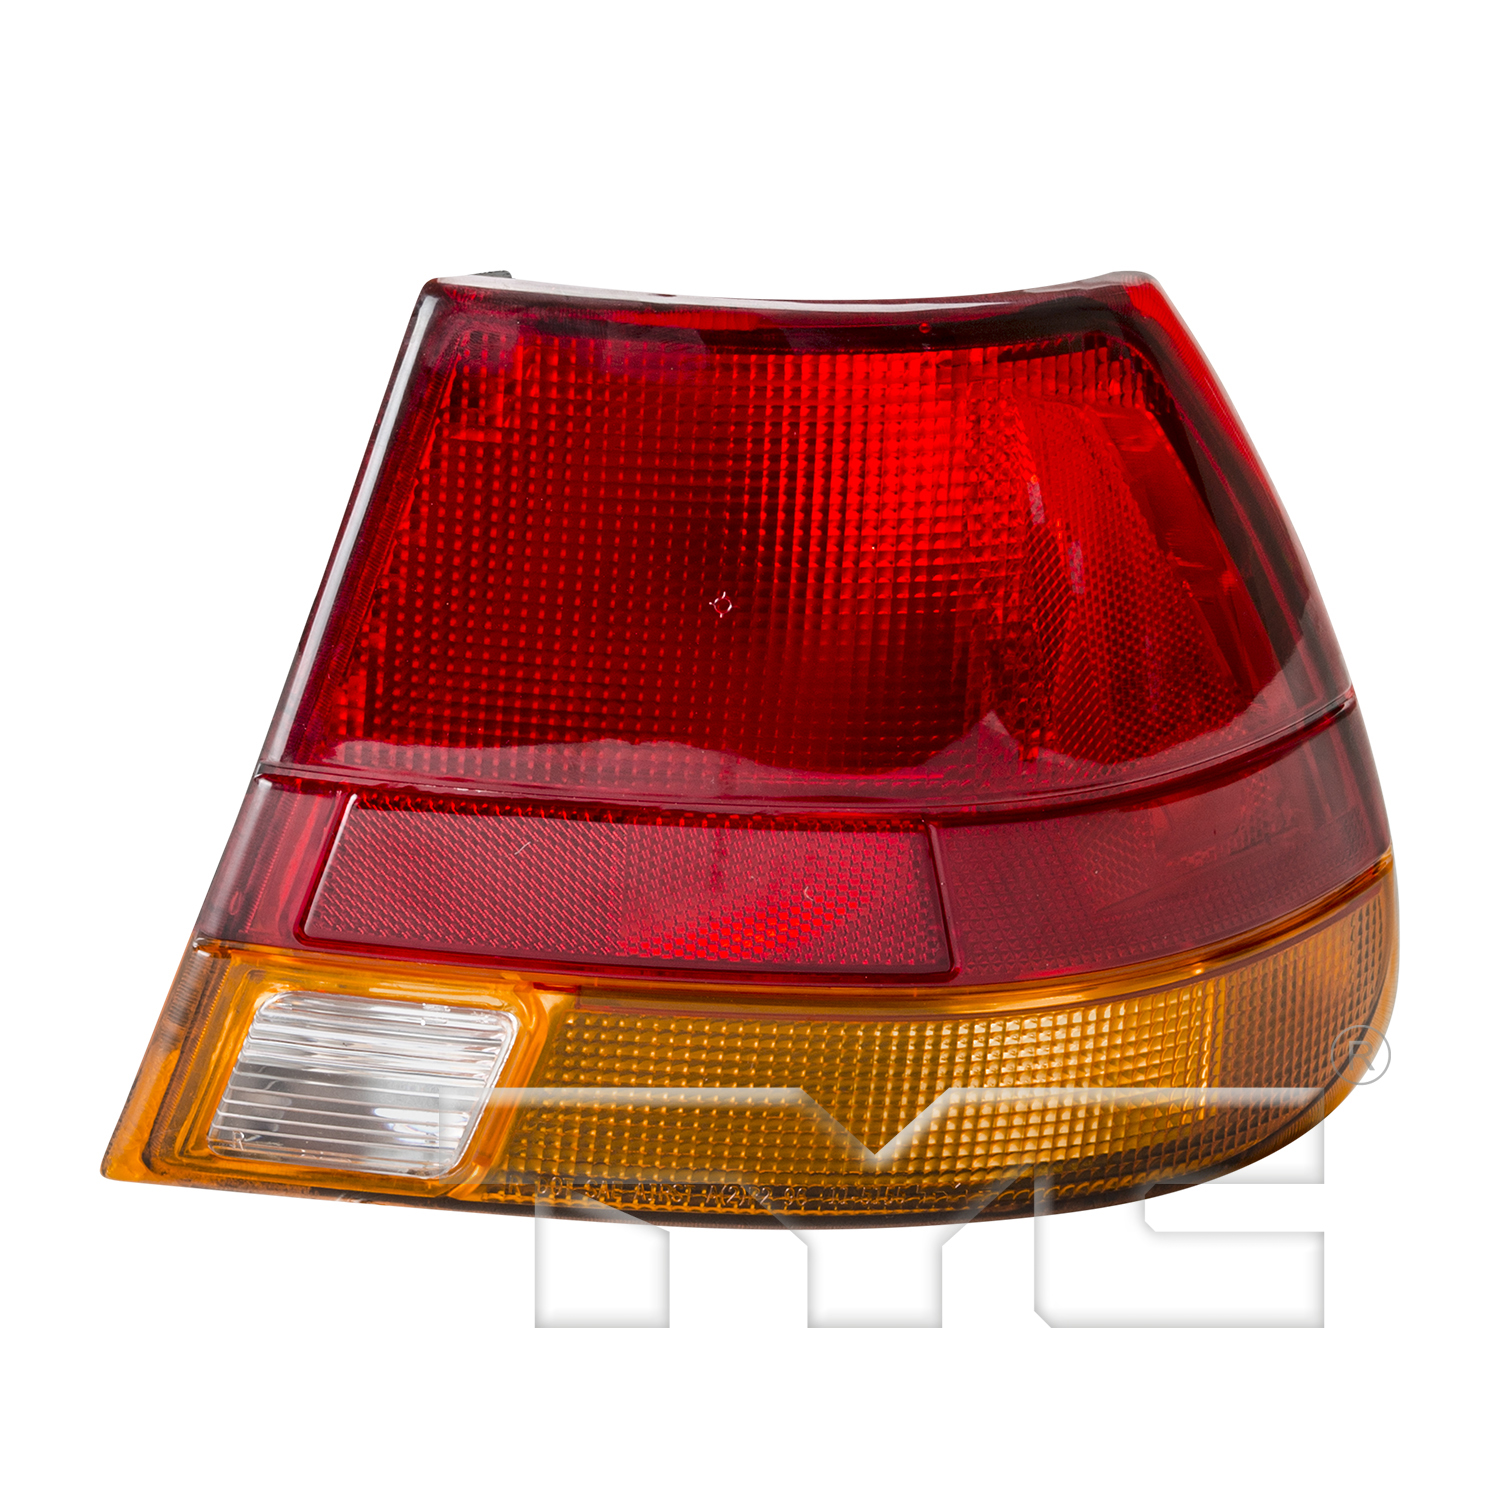 Aftermarket TAILLIGHTS for SATURN - SL1, SL1,97-99,RT Taillamp lens/housing